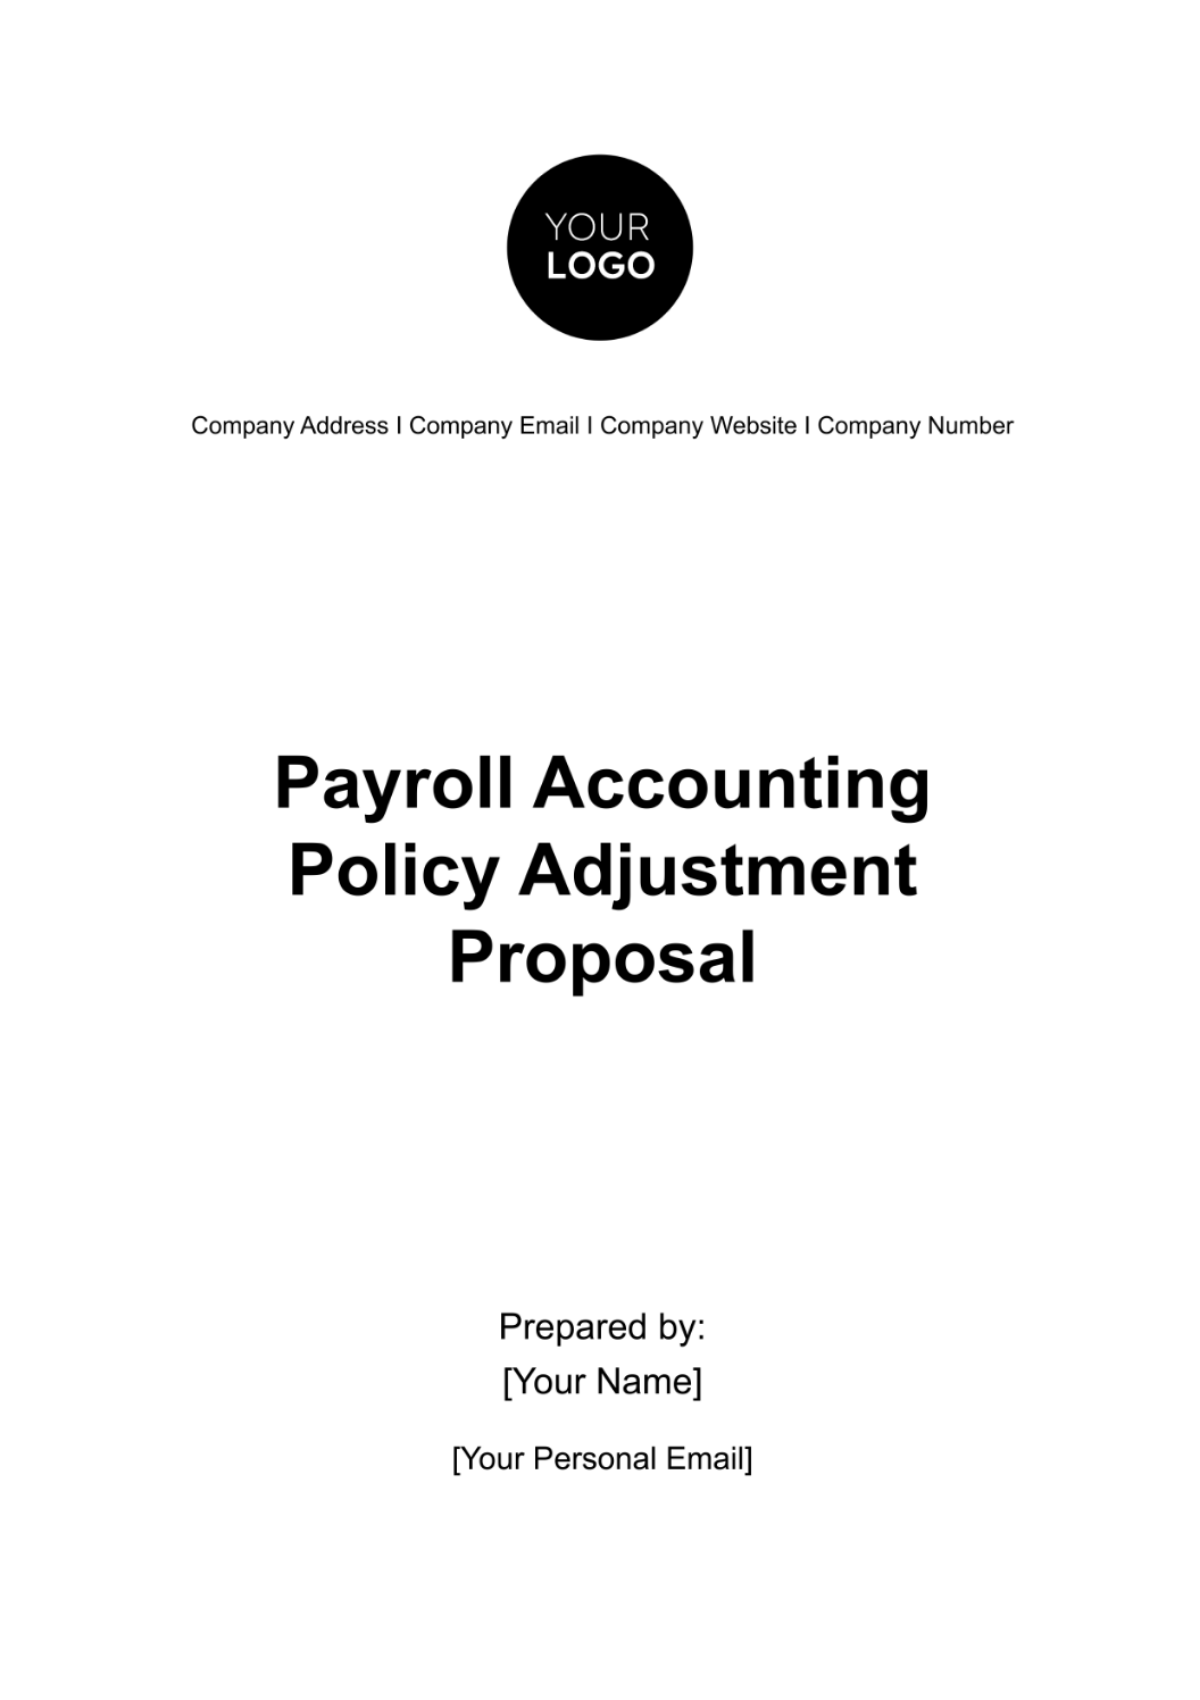 Payroll Accounting Policy Adjustment Proposal Template